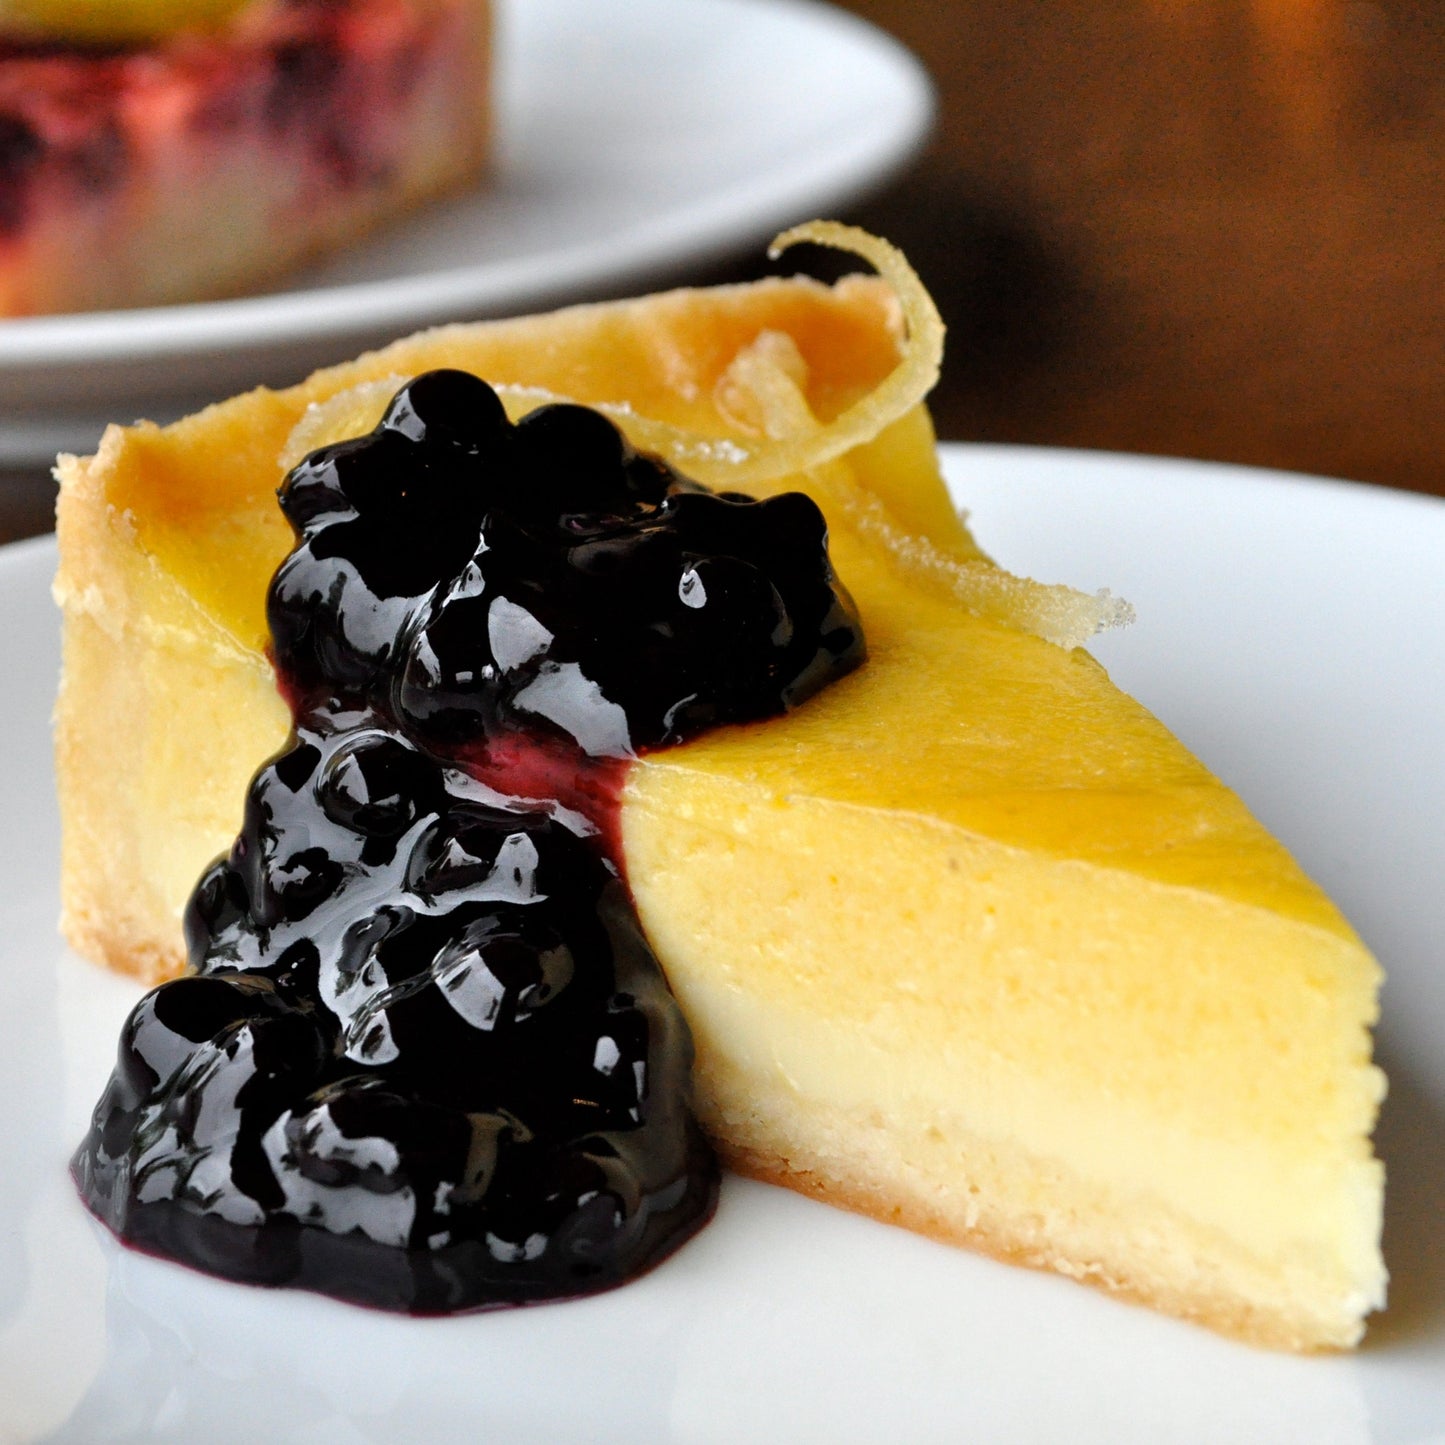 Lemon Orange Flan with Blueberry Compote